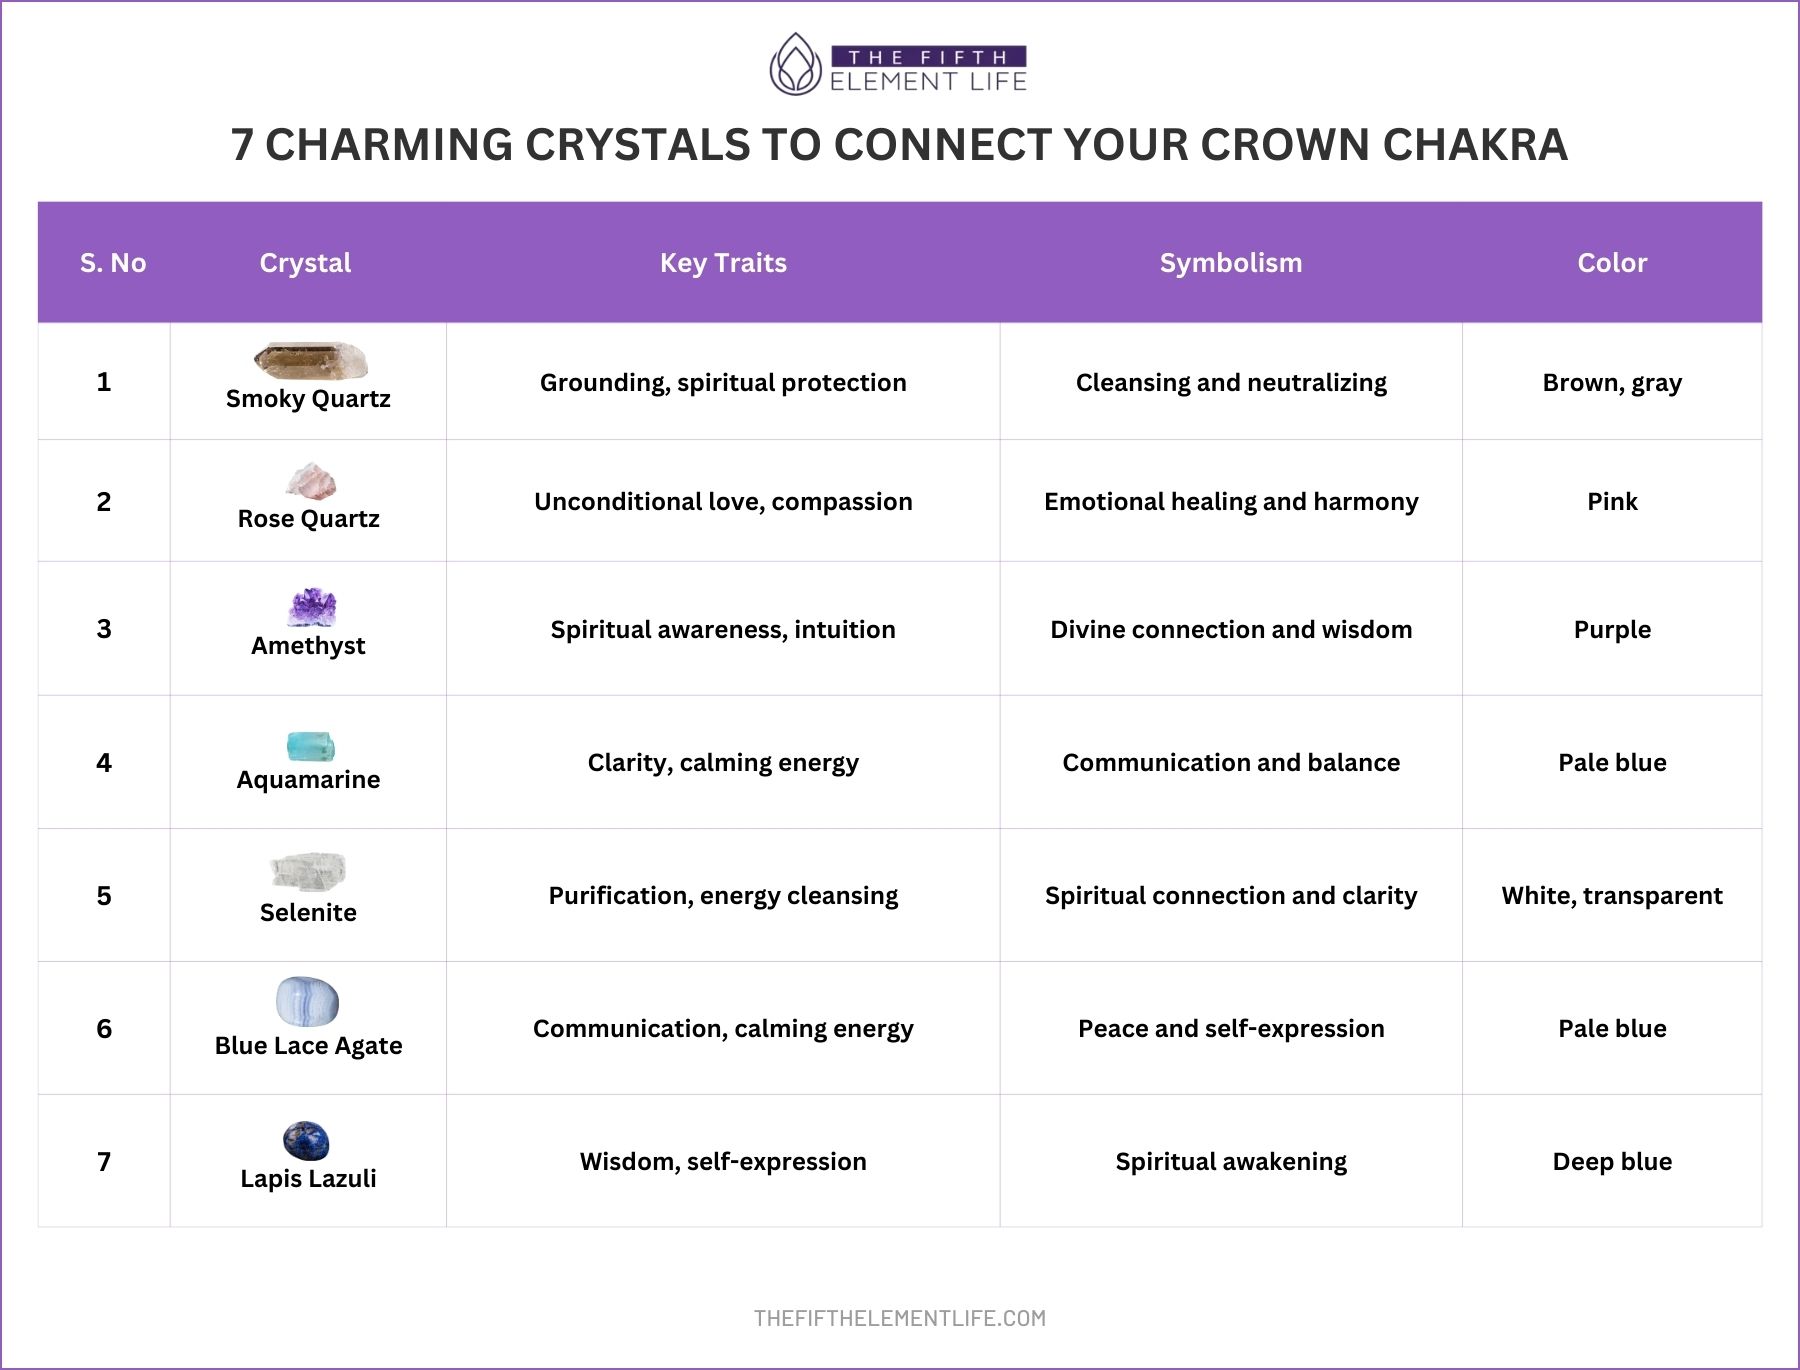 7 Charming Crystals To Connect Your Crown Chakra